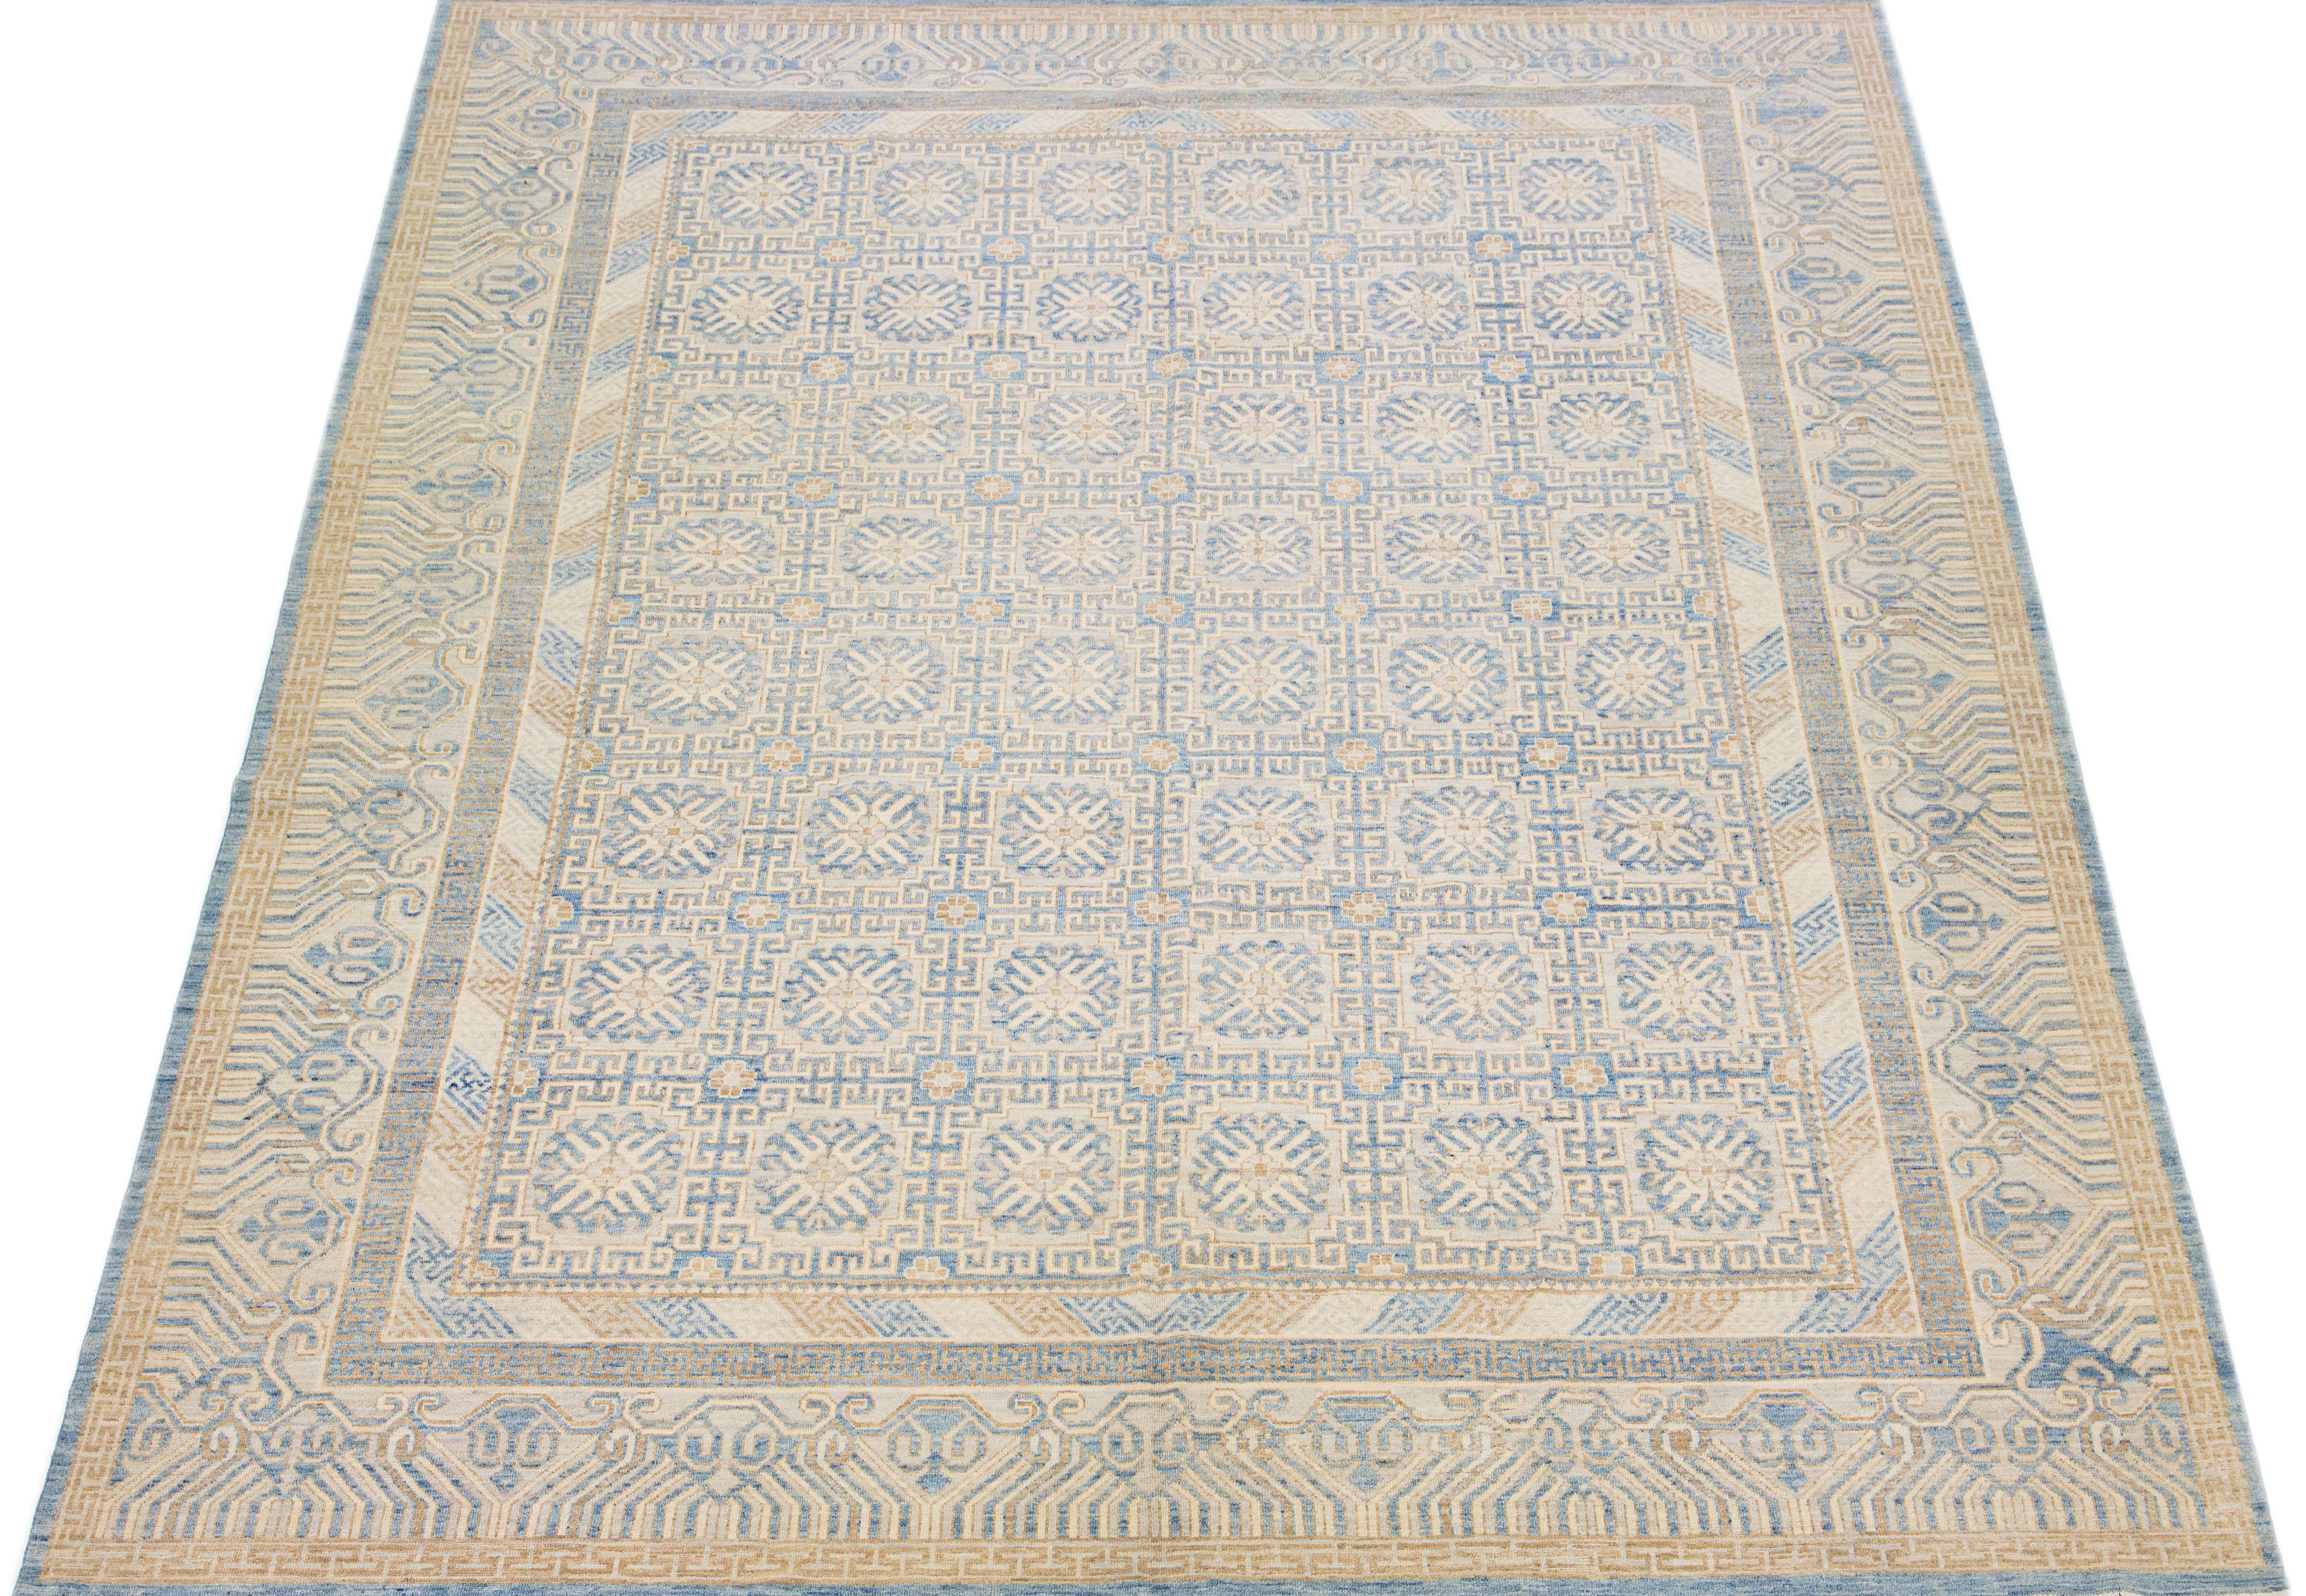 Beautiful modern Khotan tone-on-tone hand knotted wool rug with a beige color field. This piece has blue and brown accents all over a gorgeous interconnected medallion rosette design.

This rug measures 12' x 15'4